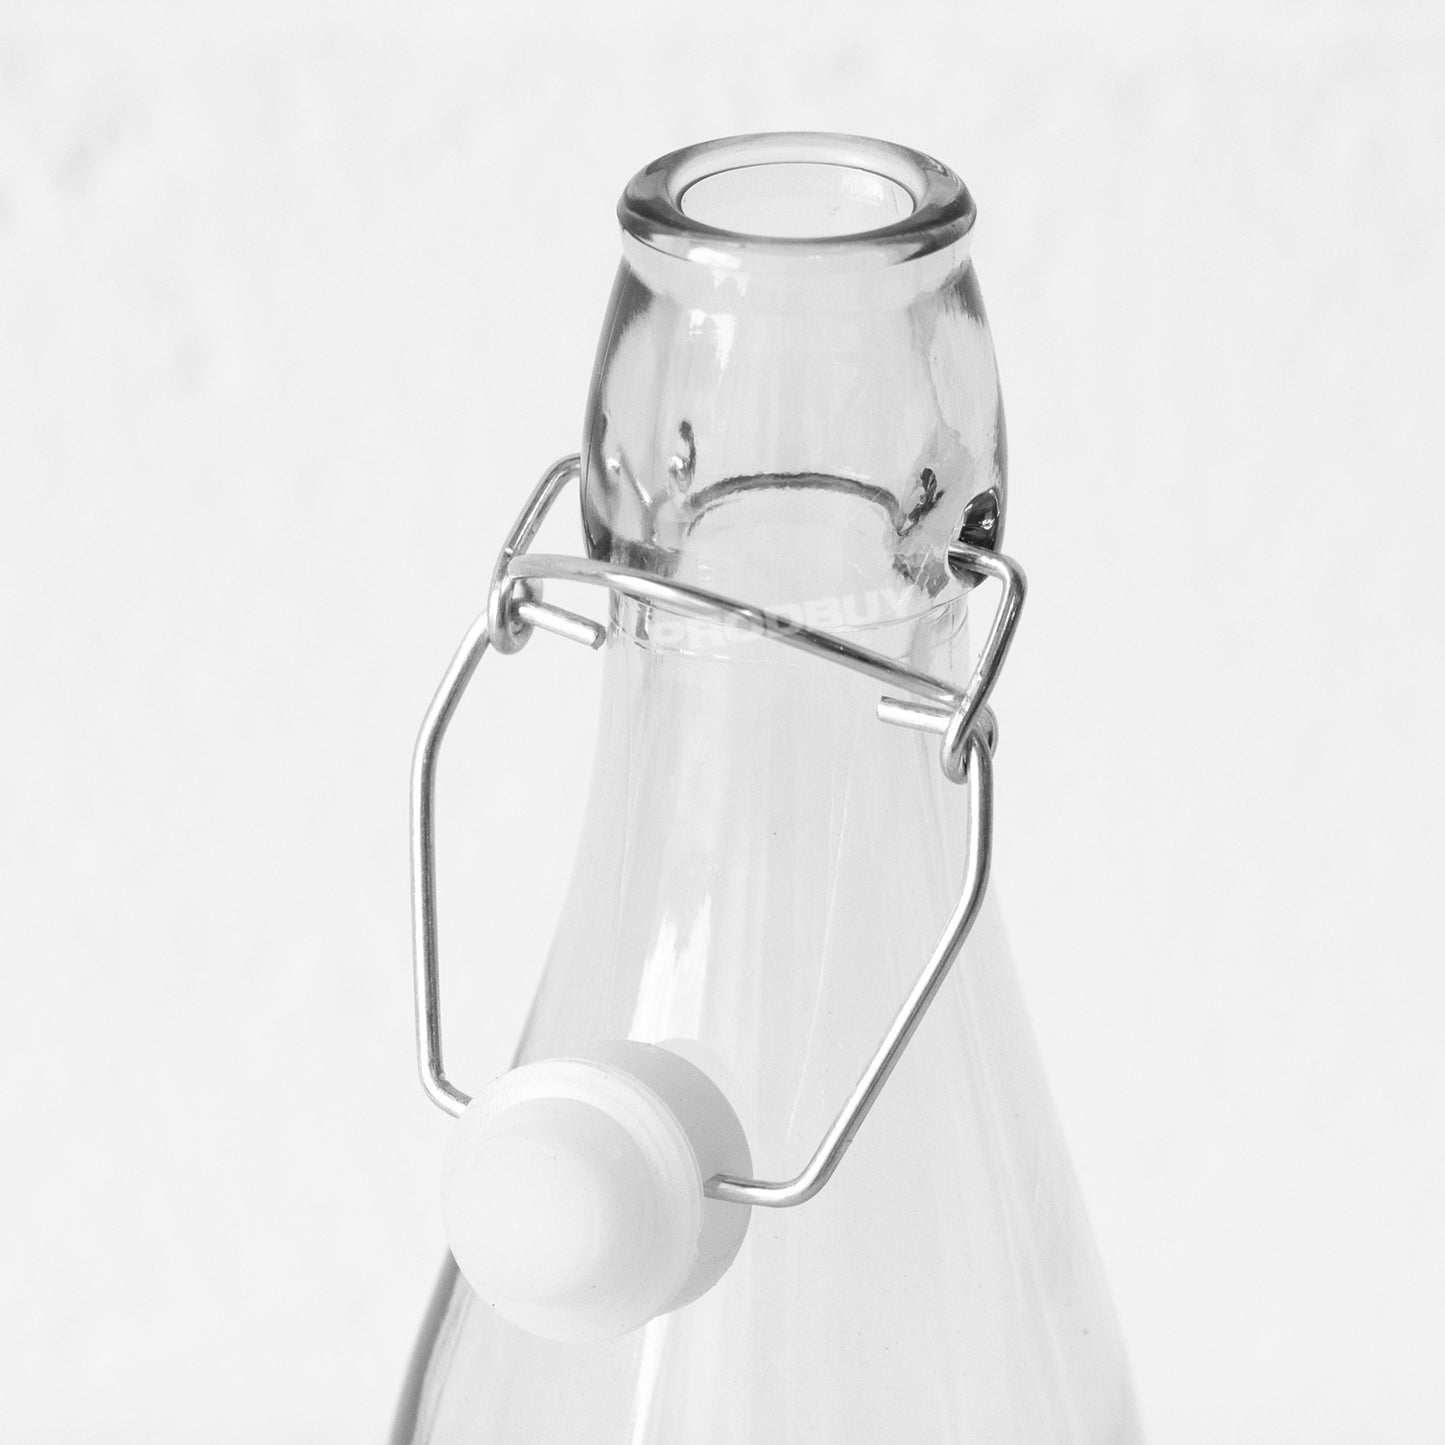 Set of 2 Glass 500ml Preserve Bottles with Clip Top Lids